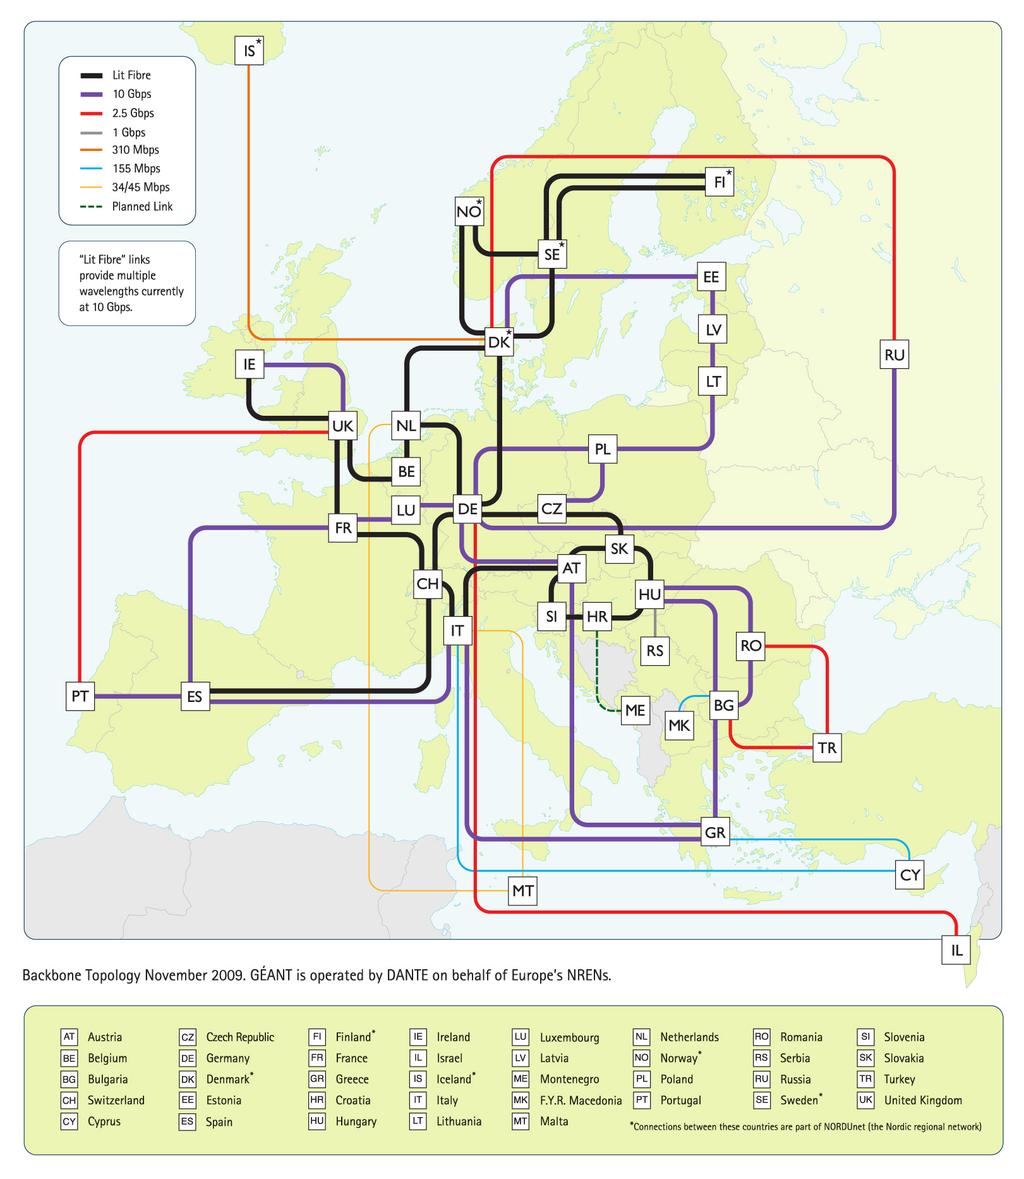 A refresher what is GÉANT? Local campus networks link to national research networks (EU NRENS) that interconnect via the GÉANT backbone!